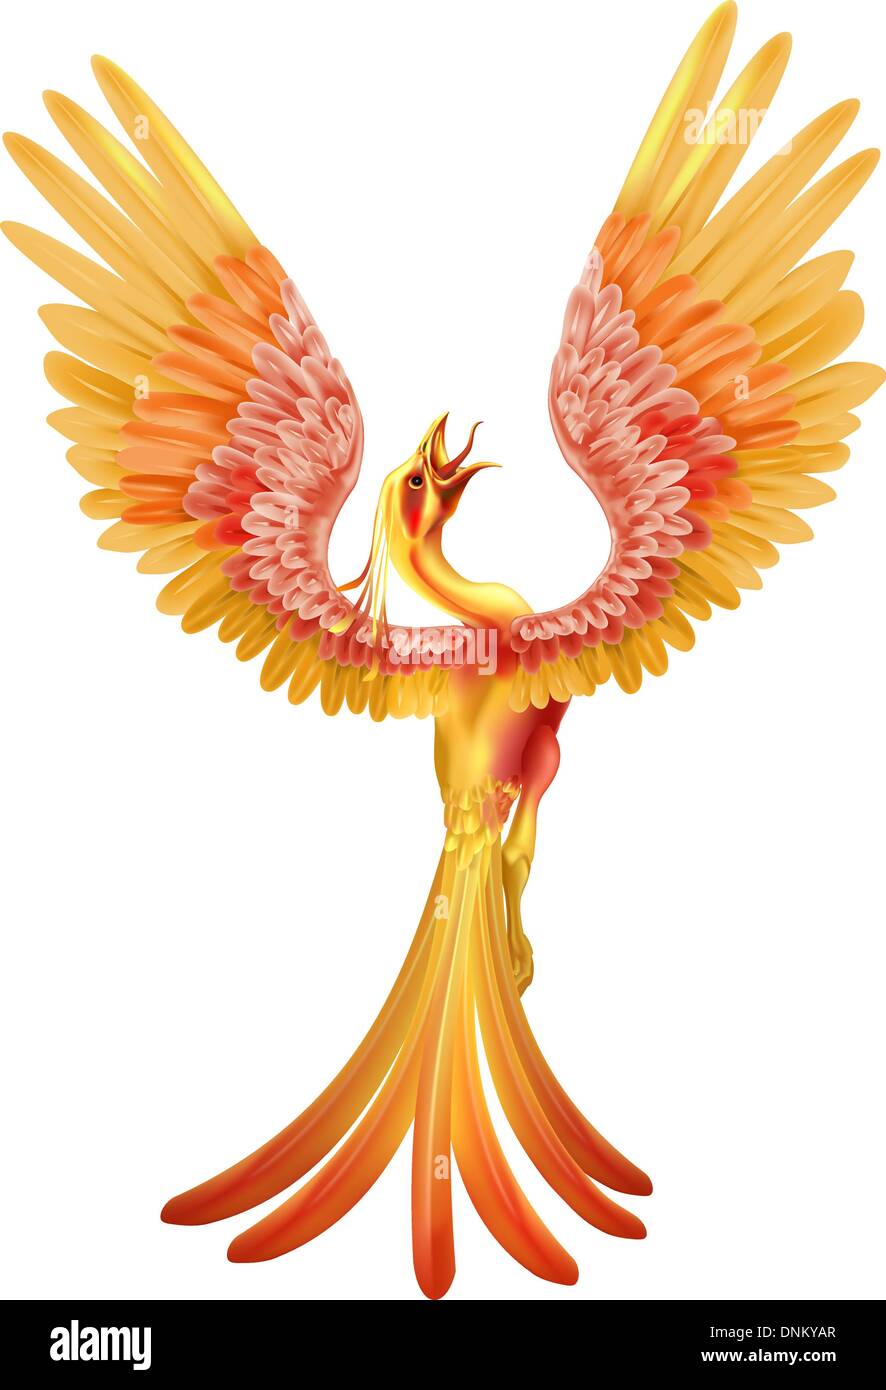 A Phoenix Bird Rising From The Ashes With Wings Spread Out Stock Vector Image Art Alamy